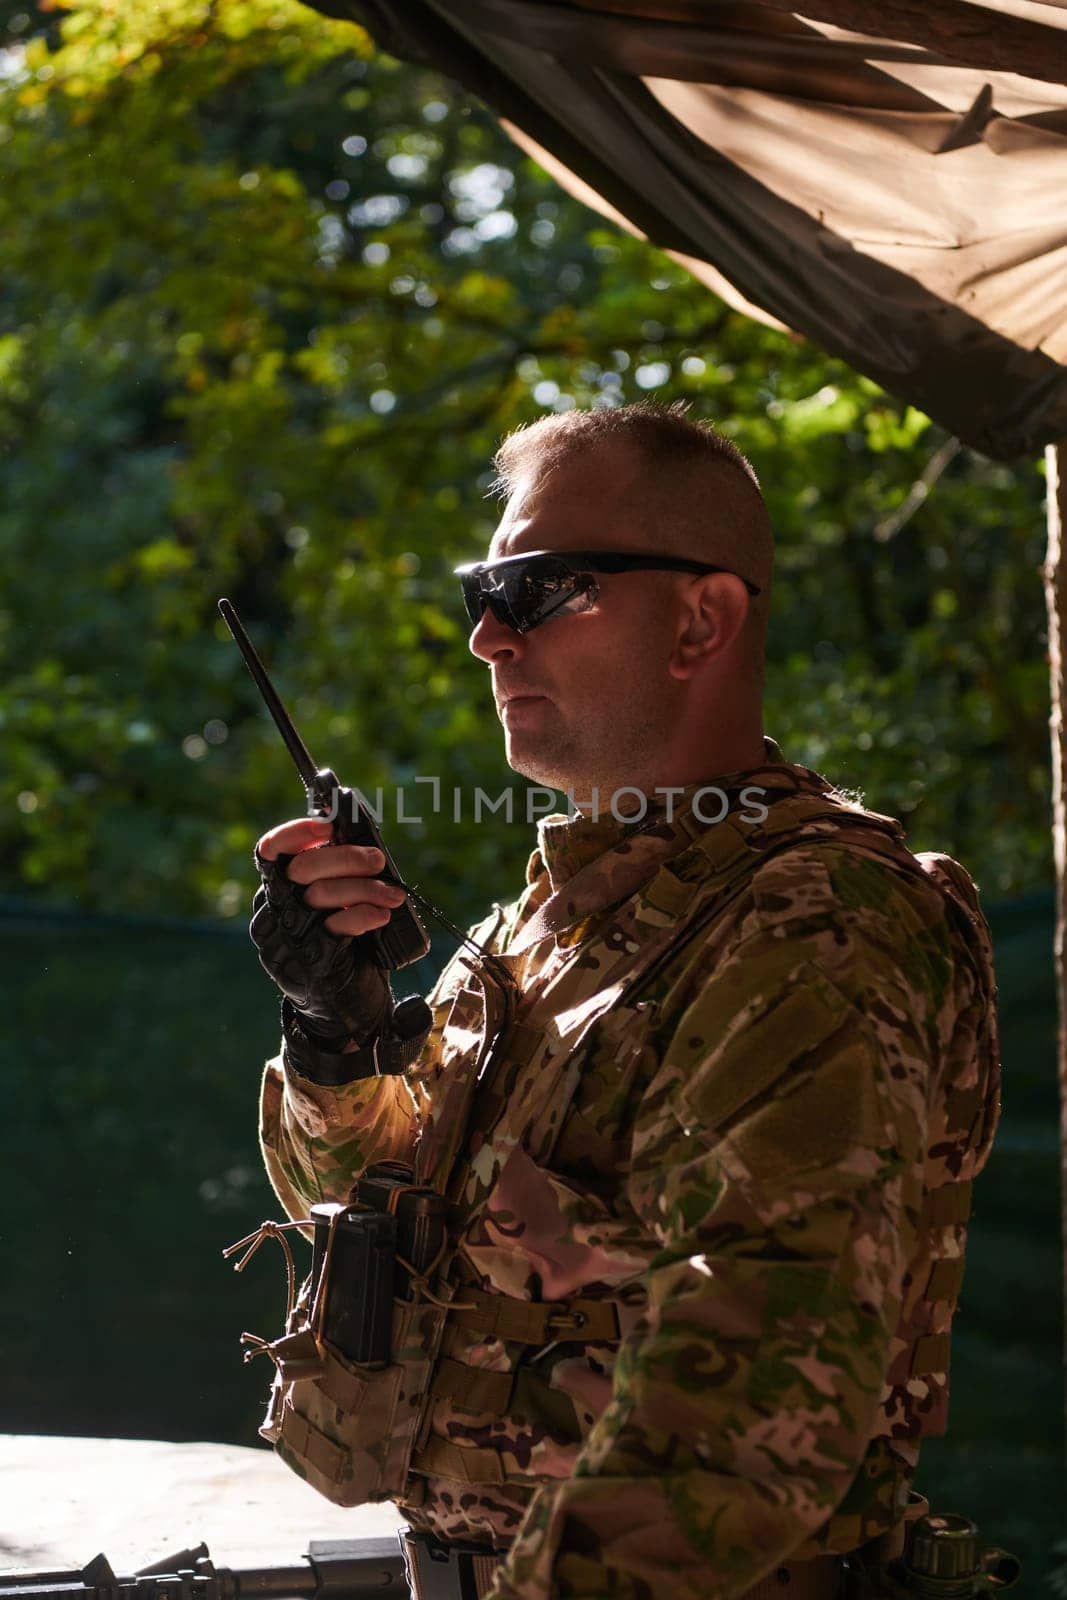 A military major employs a Motorola radio for seamless communication with his fellow soldiers during a tactical operation, showcasing professionalism and strategic coordination by dotshock